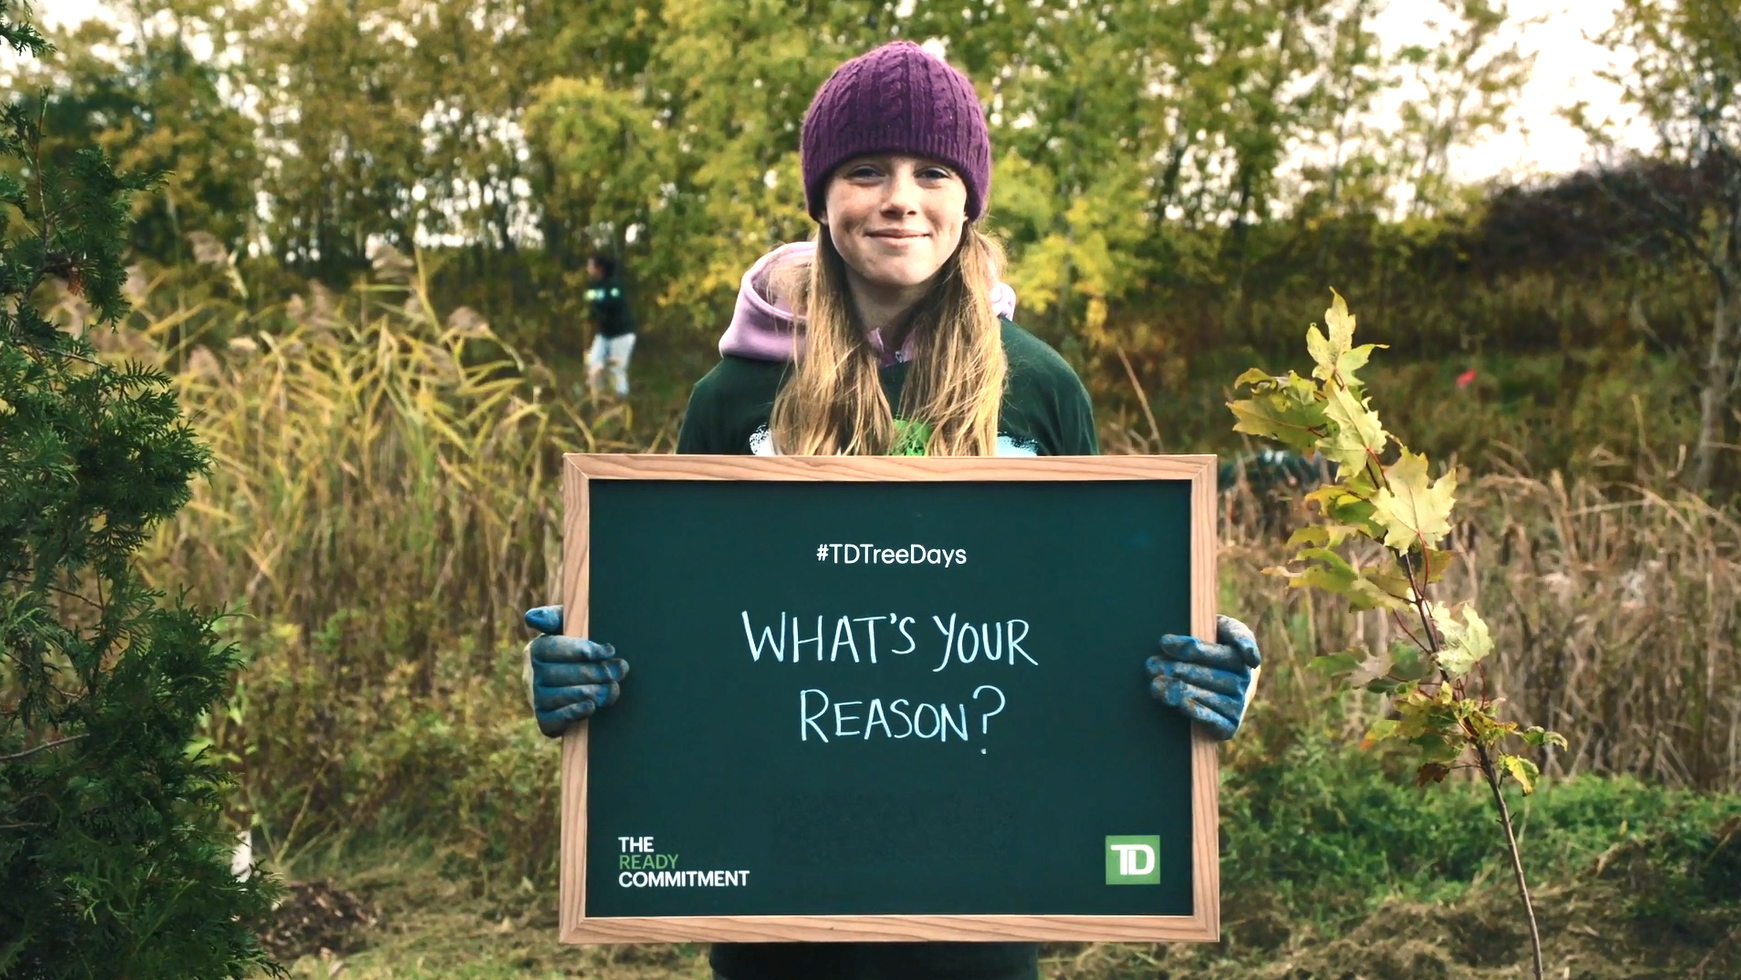 A volunteer holding sign that says: #TD Tree Days. What's Your Reason? The Ready Commitment